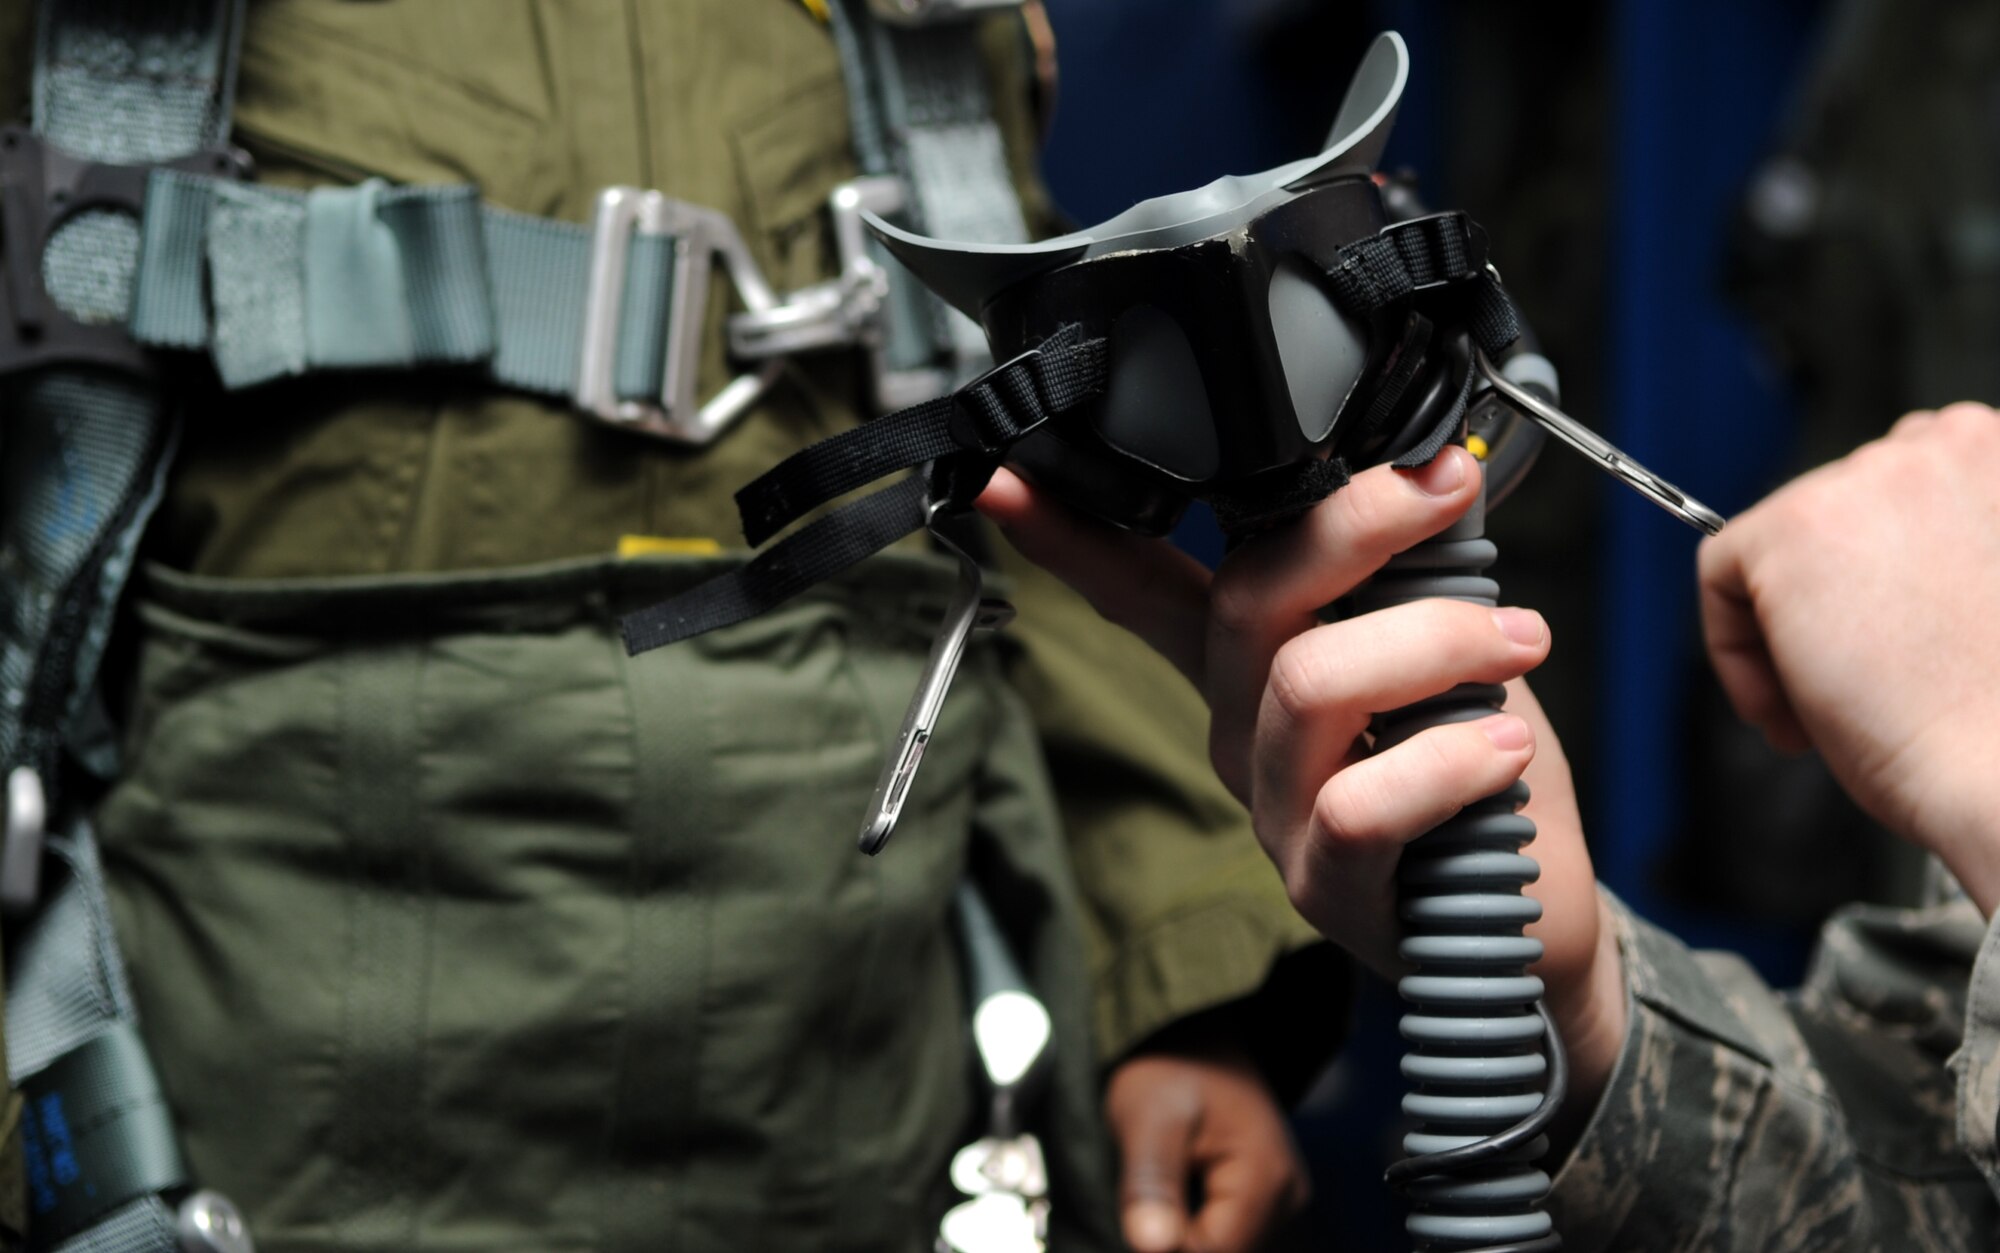 Airman 1st Class Luke Locken, 4th Operations Support Squadron aircrew flight equipment technician, adjusts the oxygen mask for Jeremiah Seaberry, 334th Fighter Squadron pilot for a day, during a 4th Fighter Wing Pilot for a Day event, April 3, 2015, at Seymour Johnson Air Force Base, North Carolina. Jeremiah was geared up with a flight suit, flight harness, G-force compression pants, helmet, gloves and an oxygen mask. (U.S. Air Force photo/Senior Airman Ashley J. Thum) 